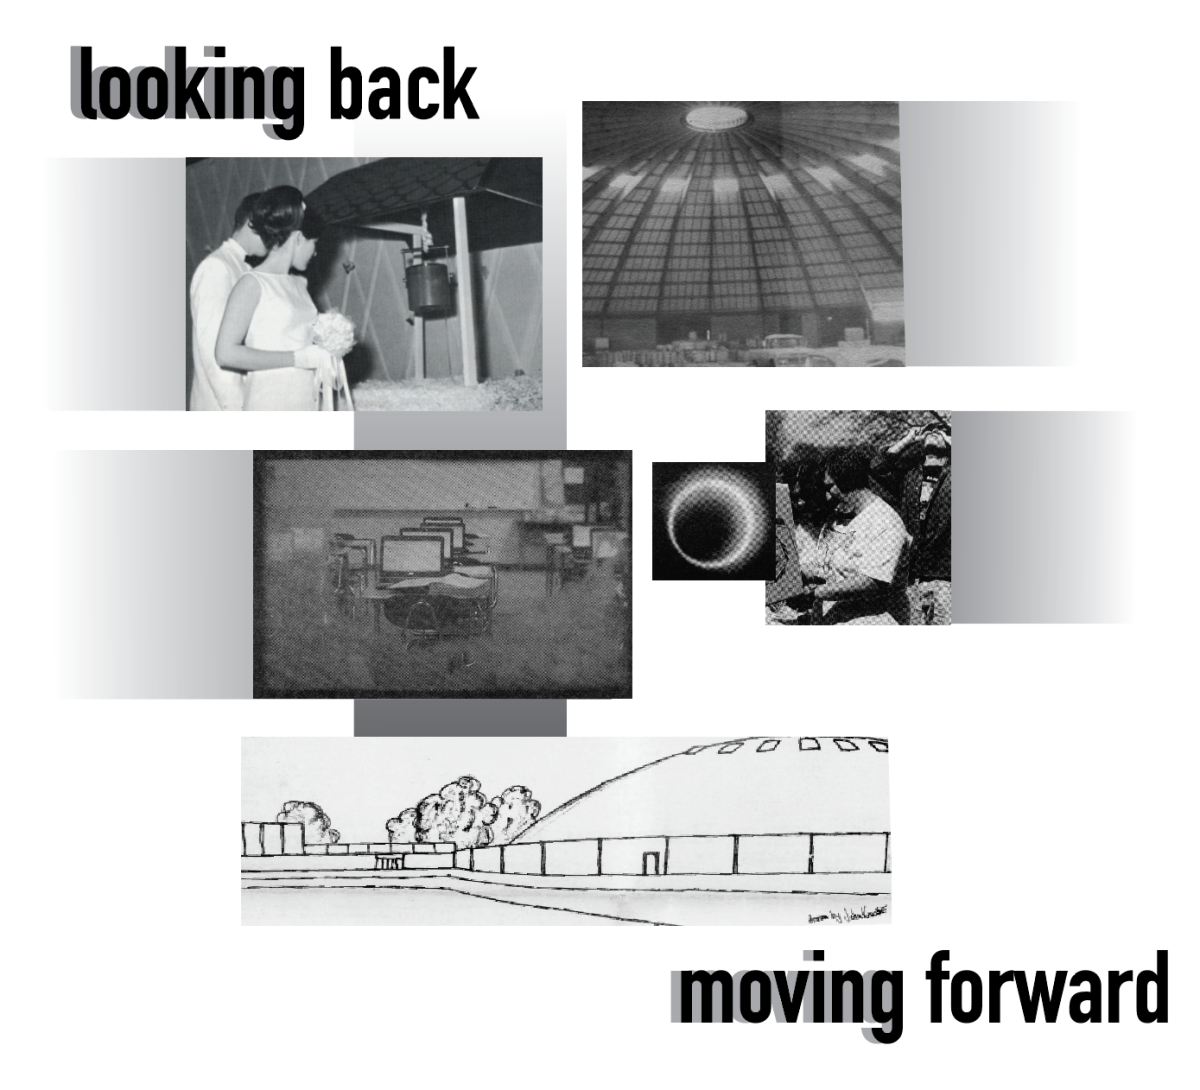 Looking back, moving forward